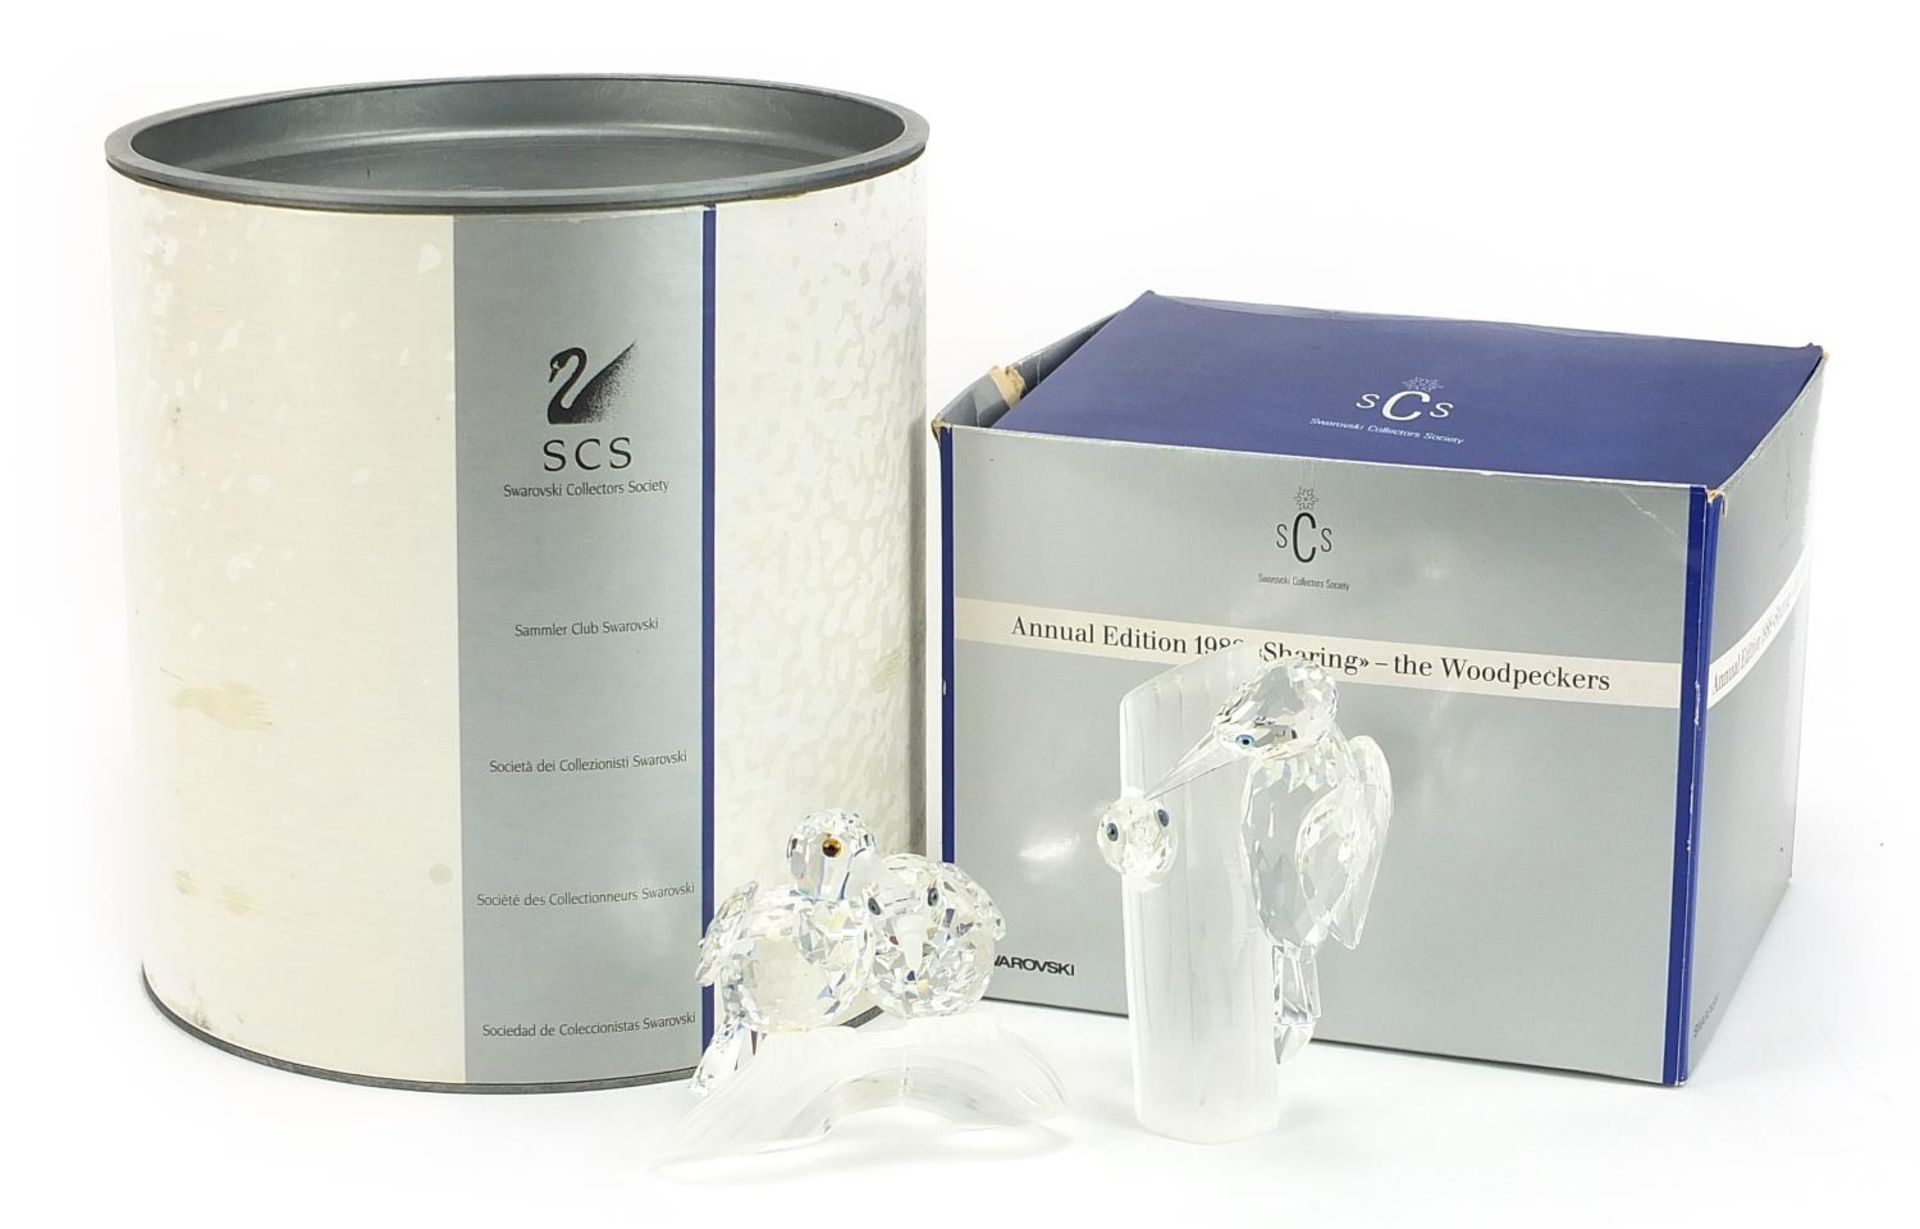 Swarovski Crystal 1988 and 1989 Annual Edition turtle doves and woodpeckers with boxes, the